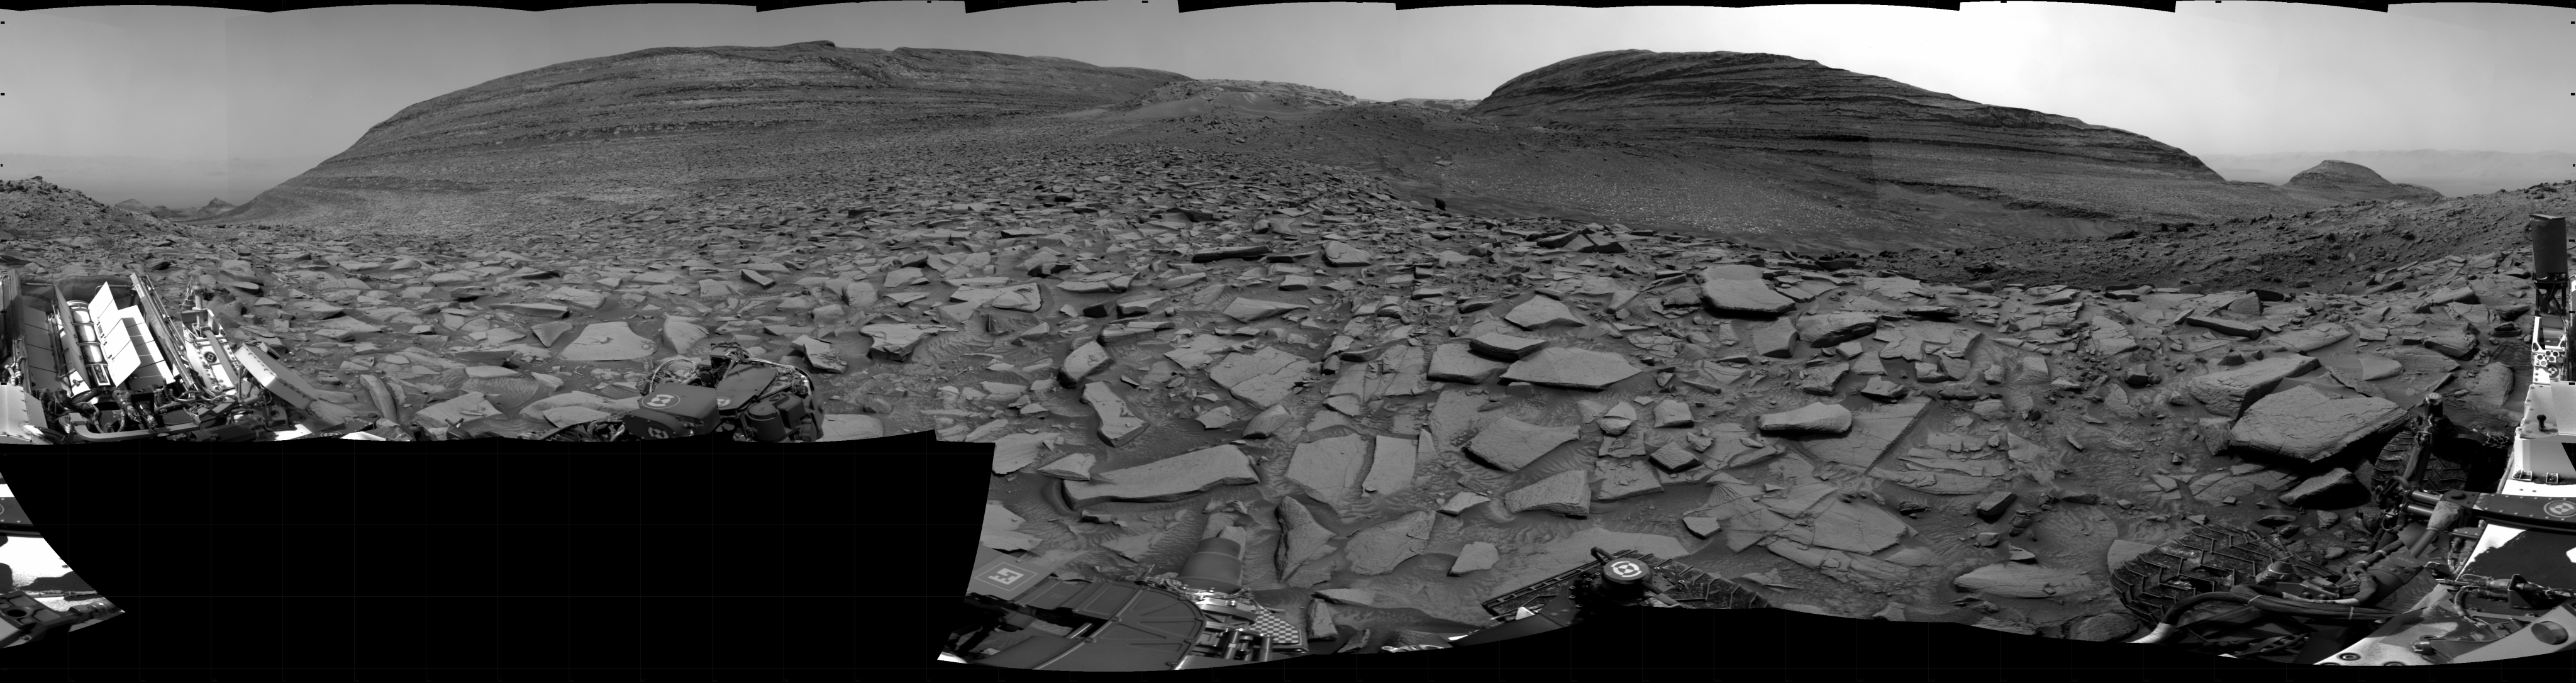 NASA's Mars rover Curiosity took 31 images in Gale Crater